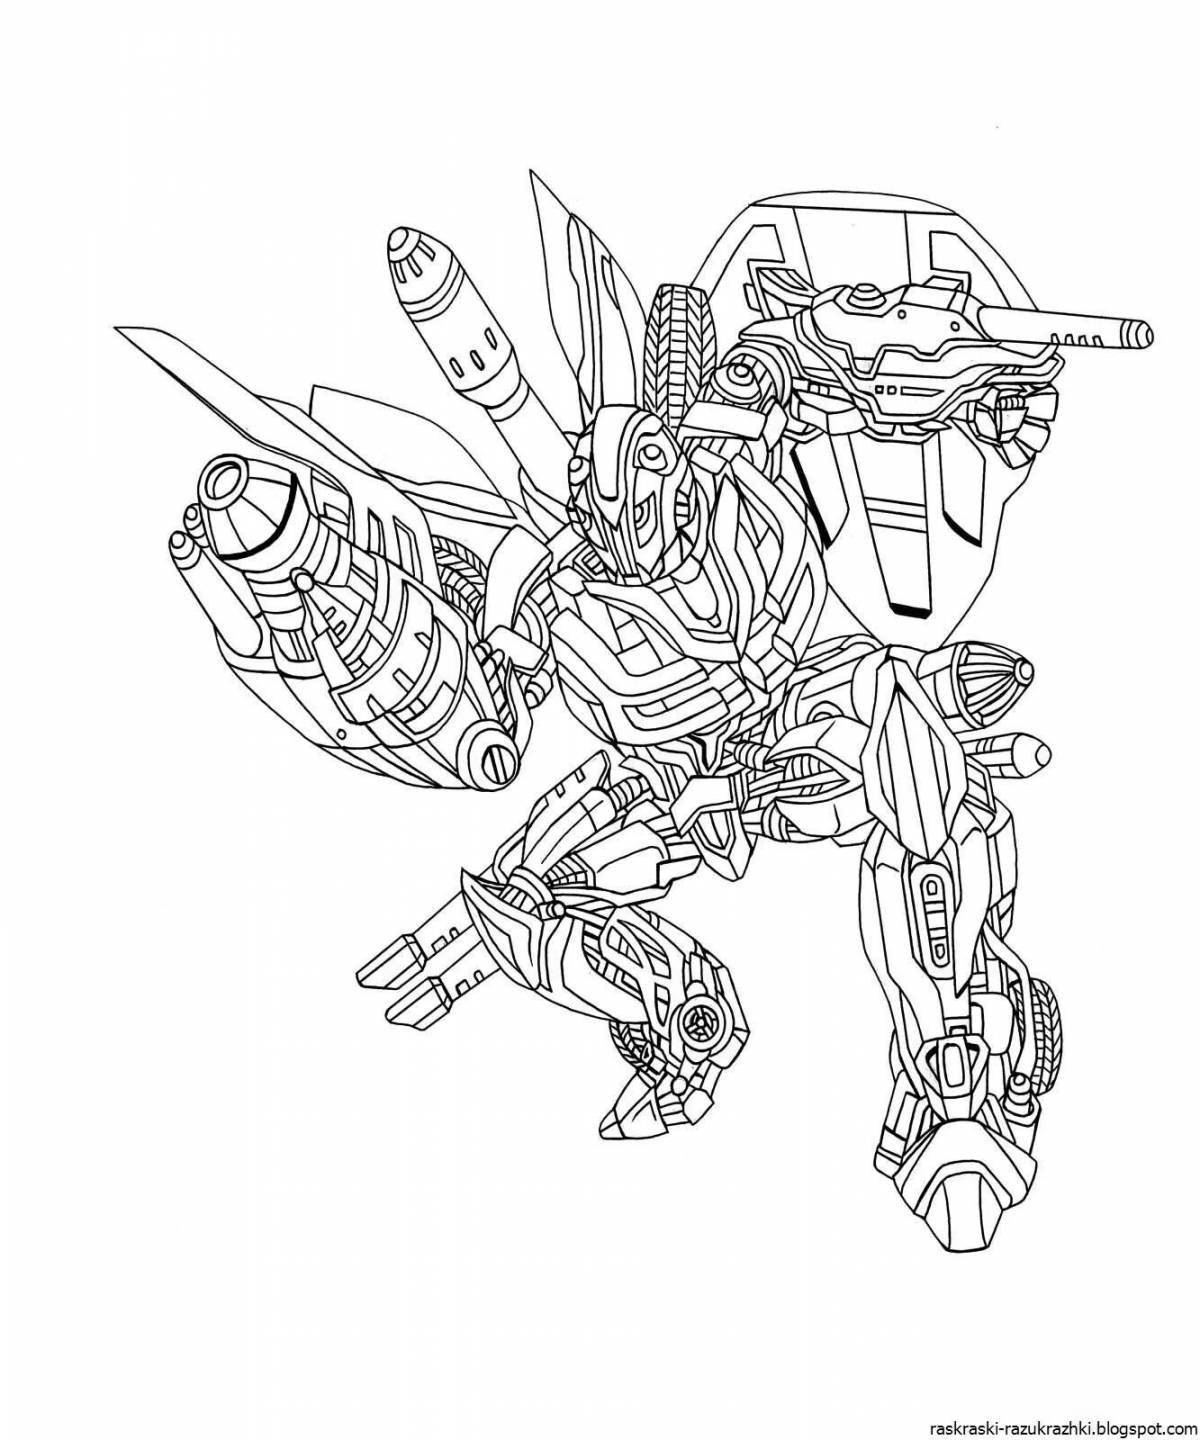 Exciting bumblebee robot coloring page for kids